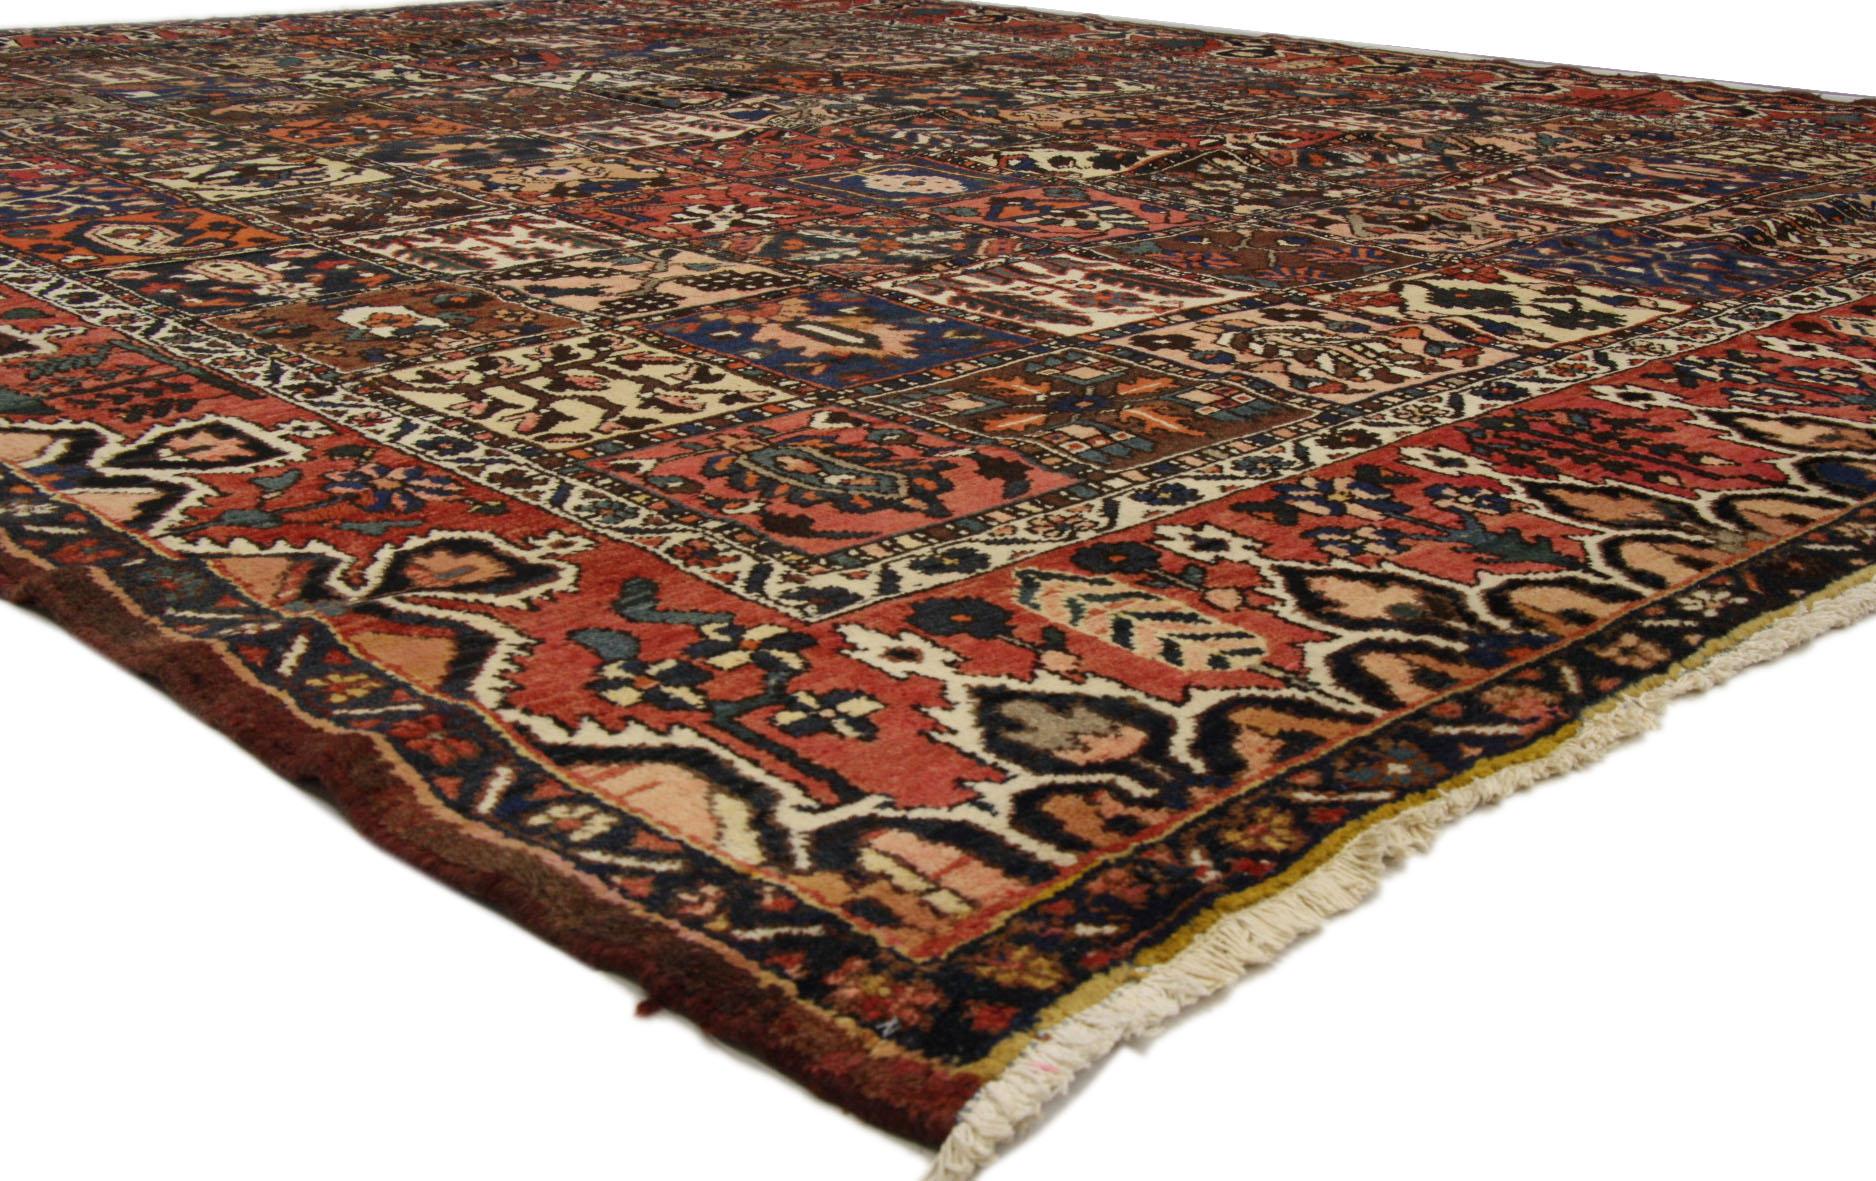 Refined colors integrated with a rich patina, this hand-knotted wool antique Persian Bakhtiari rug features the four Seasons design with a traditional modern style. Classically composed and boasting a truly magnificent four seasons panel compartment